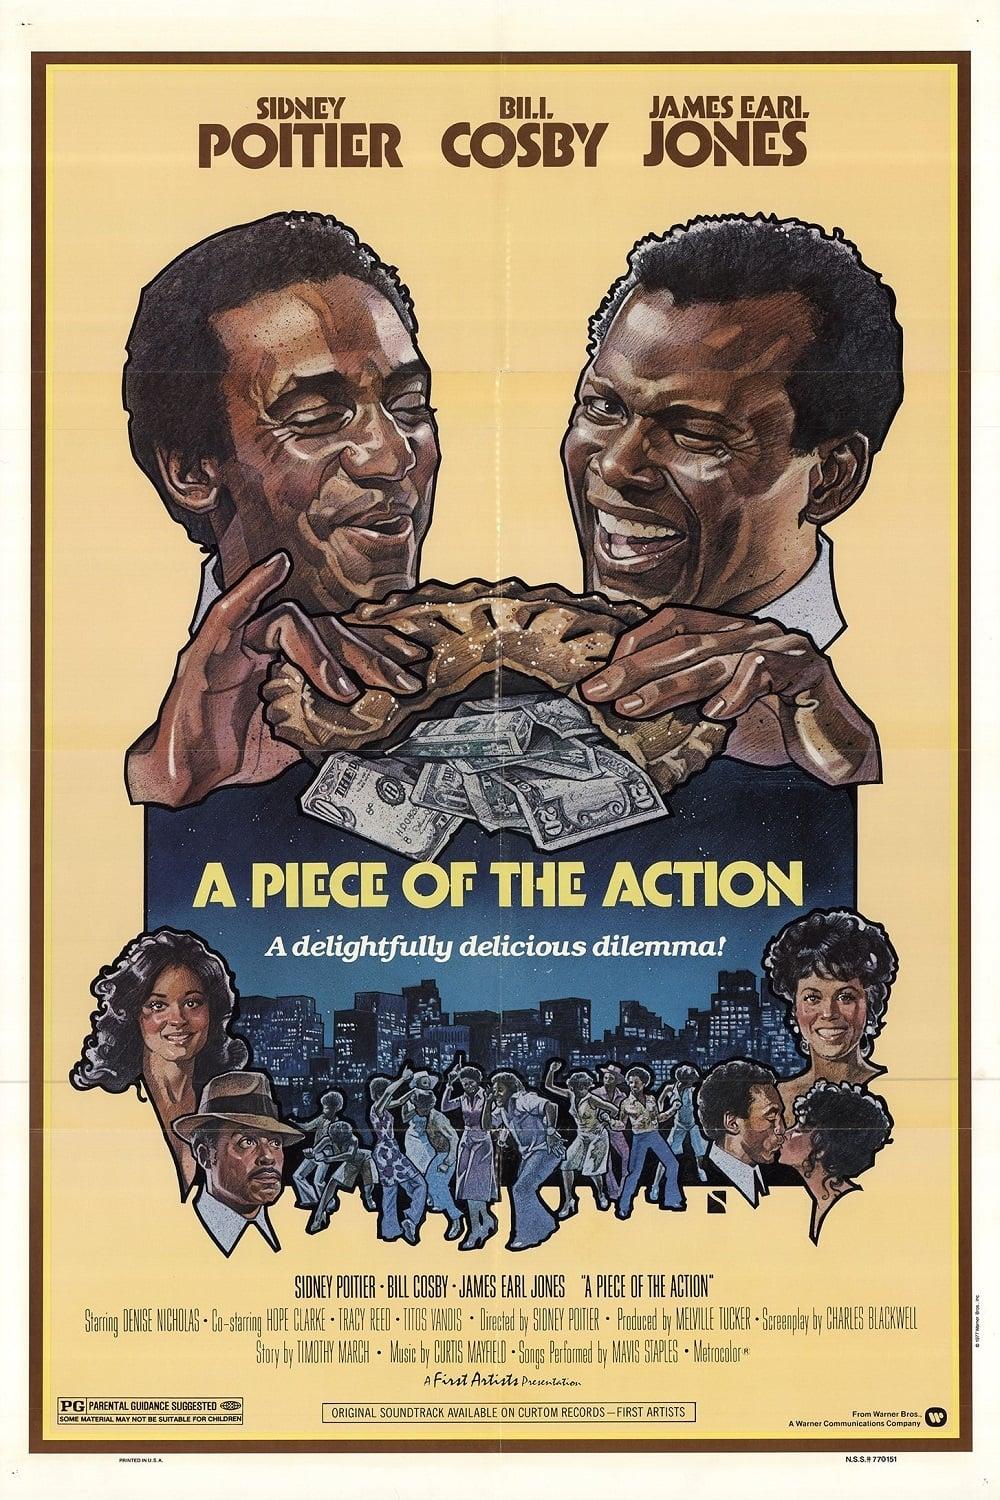 A Piece of the Action poster